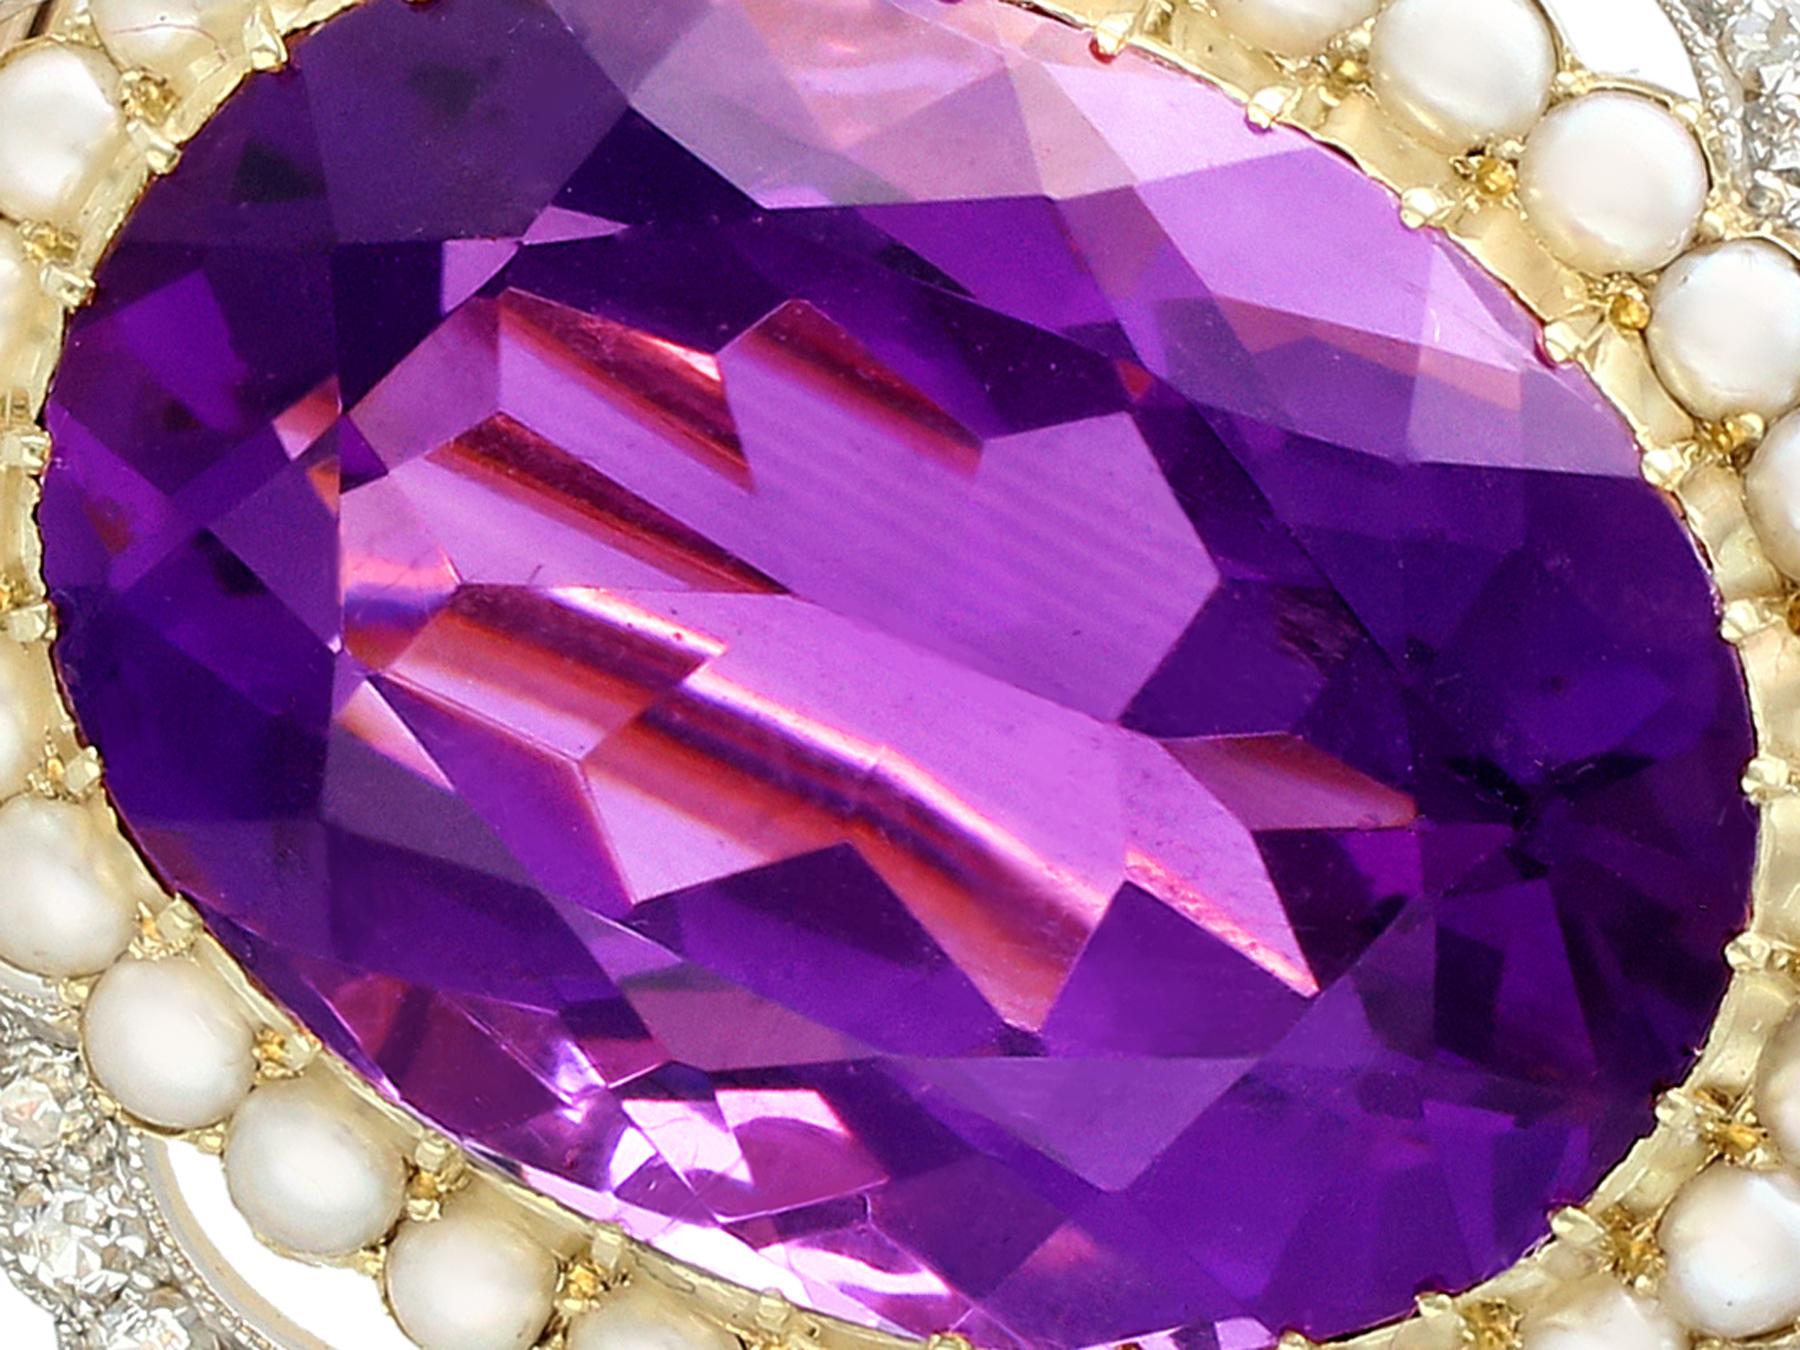 A stunning antique 34.49 carat amethyst and 2.95 carat diamond 15 karat yellow gold and platinum set brooch; part of our diverse antique jewellery and estate jewelry collections.

This stunning, fine and impressive antique brooch has been crafted in